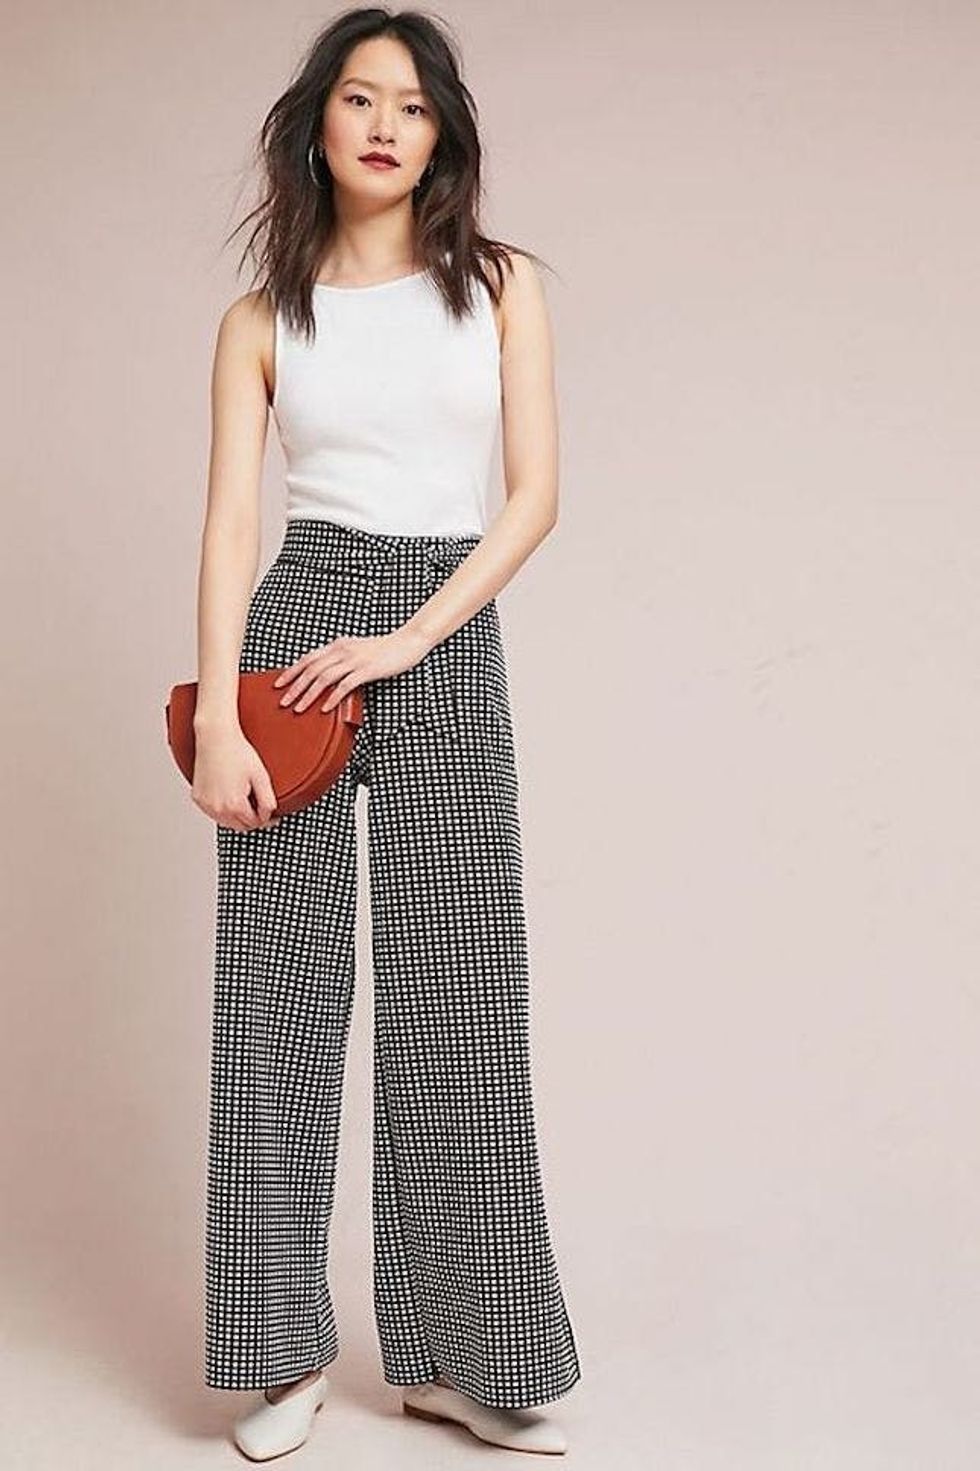 27 Surprisingly Minimalist Anthro Finds for Under $100 - Brit + Co